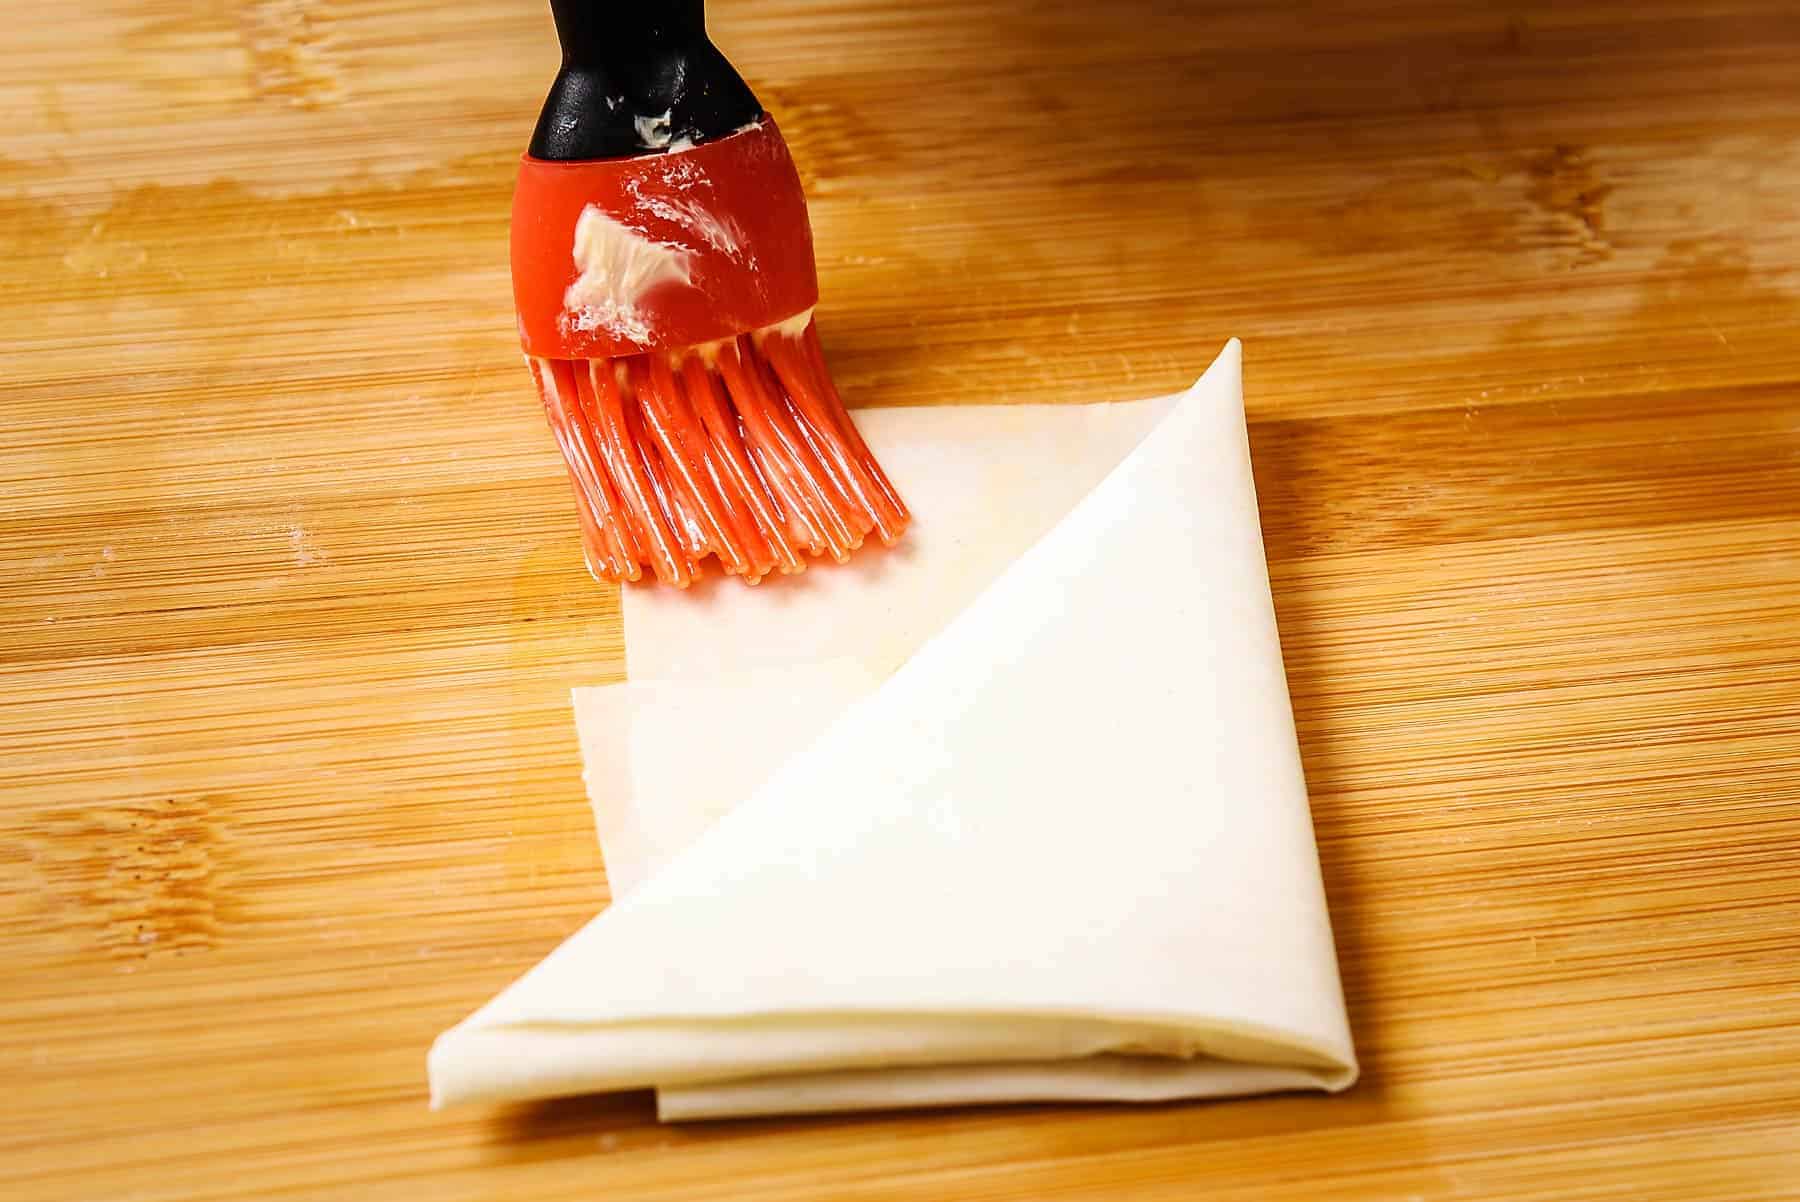 Brushing end of filo pastry with melted butter